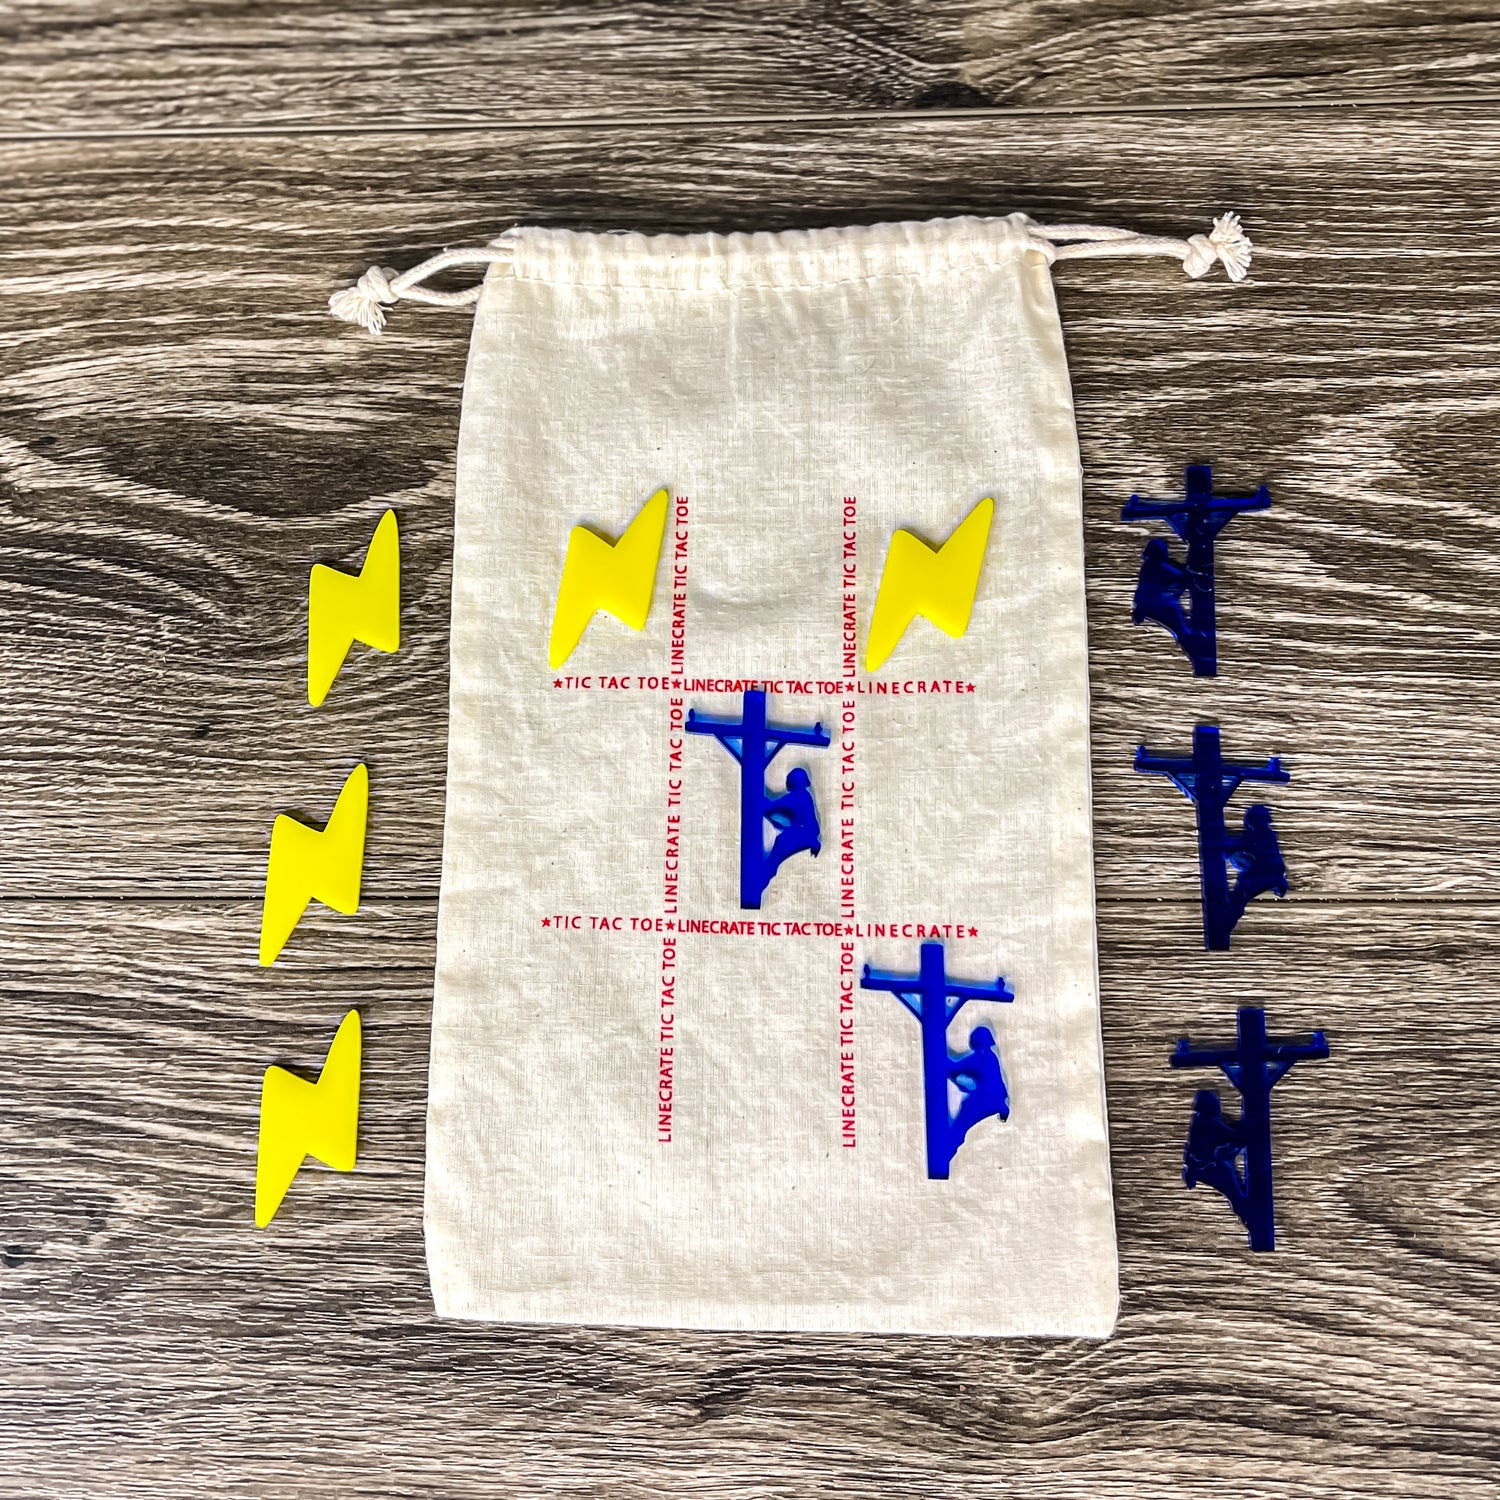 Lineman tic tac toe game and storage bag, yellow lightning bolt game pieces, and blue lineman game pieces